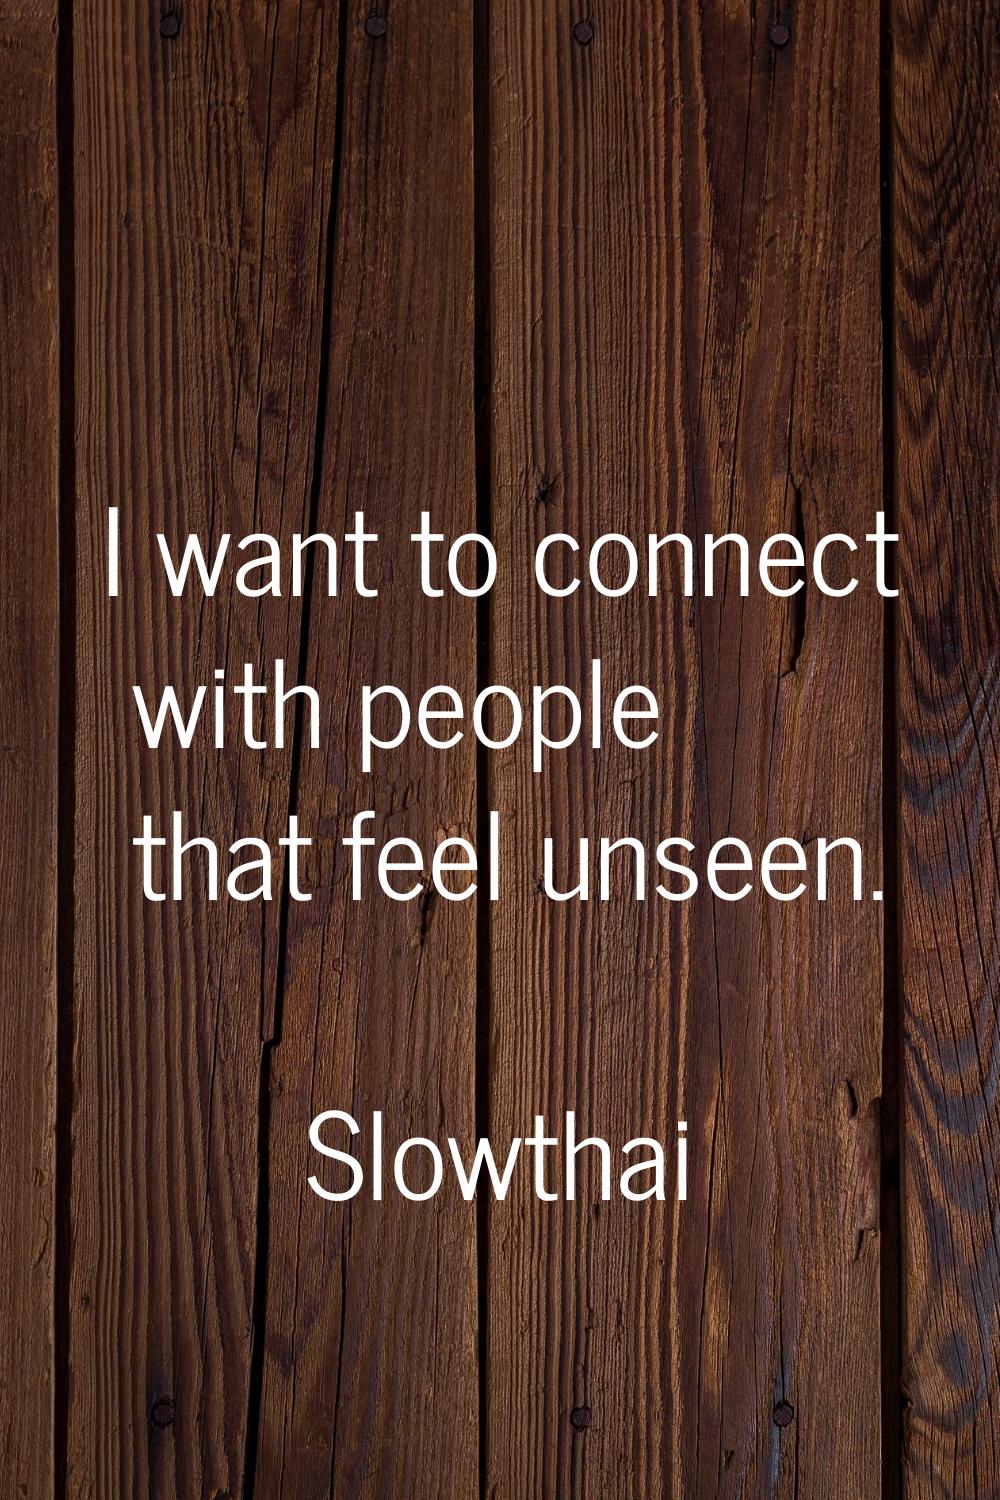 I want to connect with people that feel unseen.